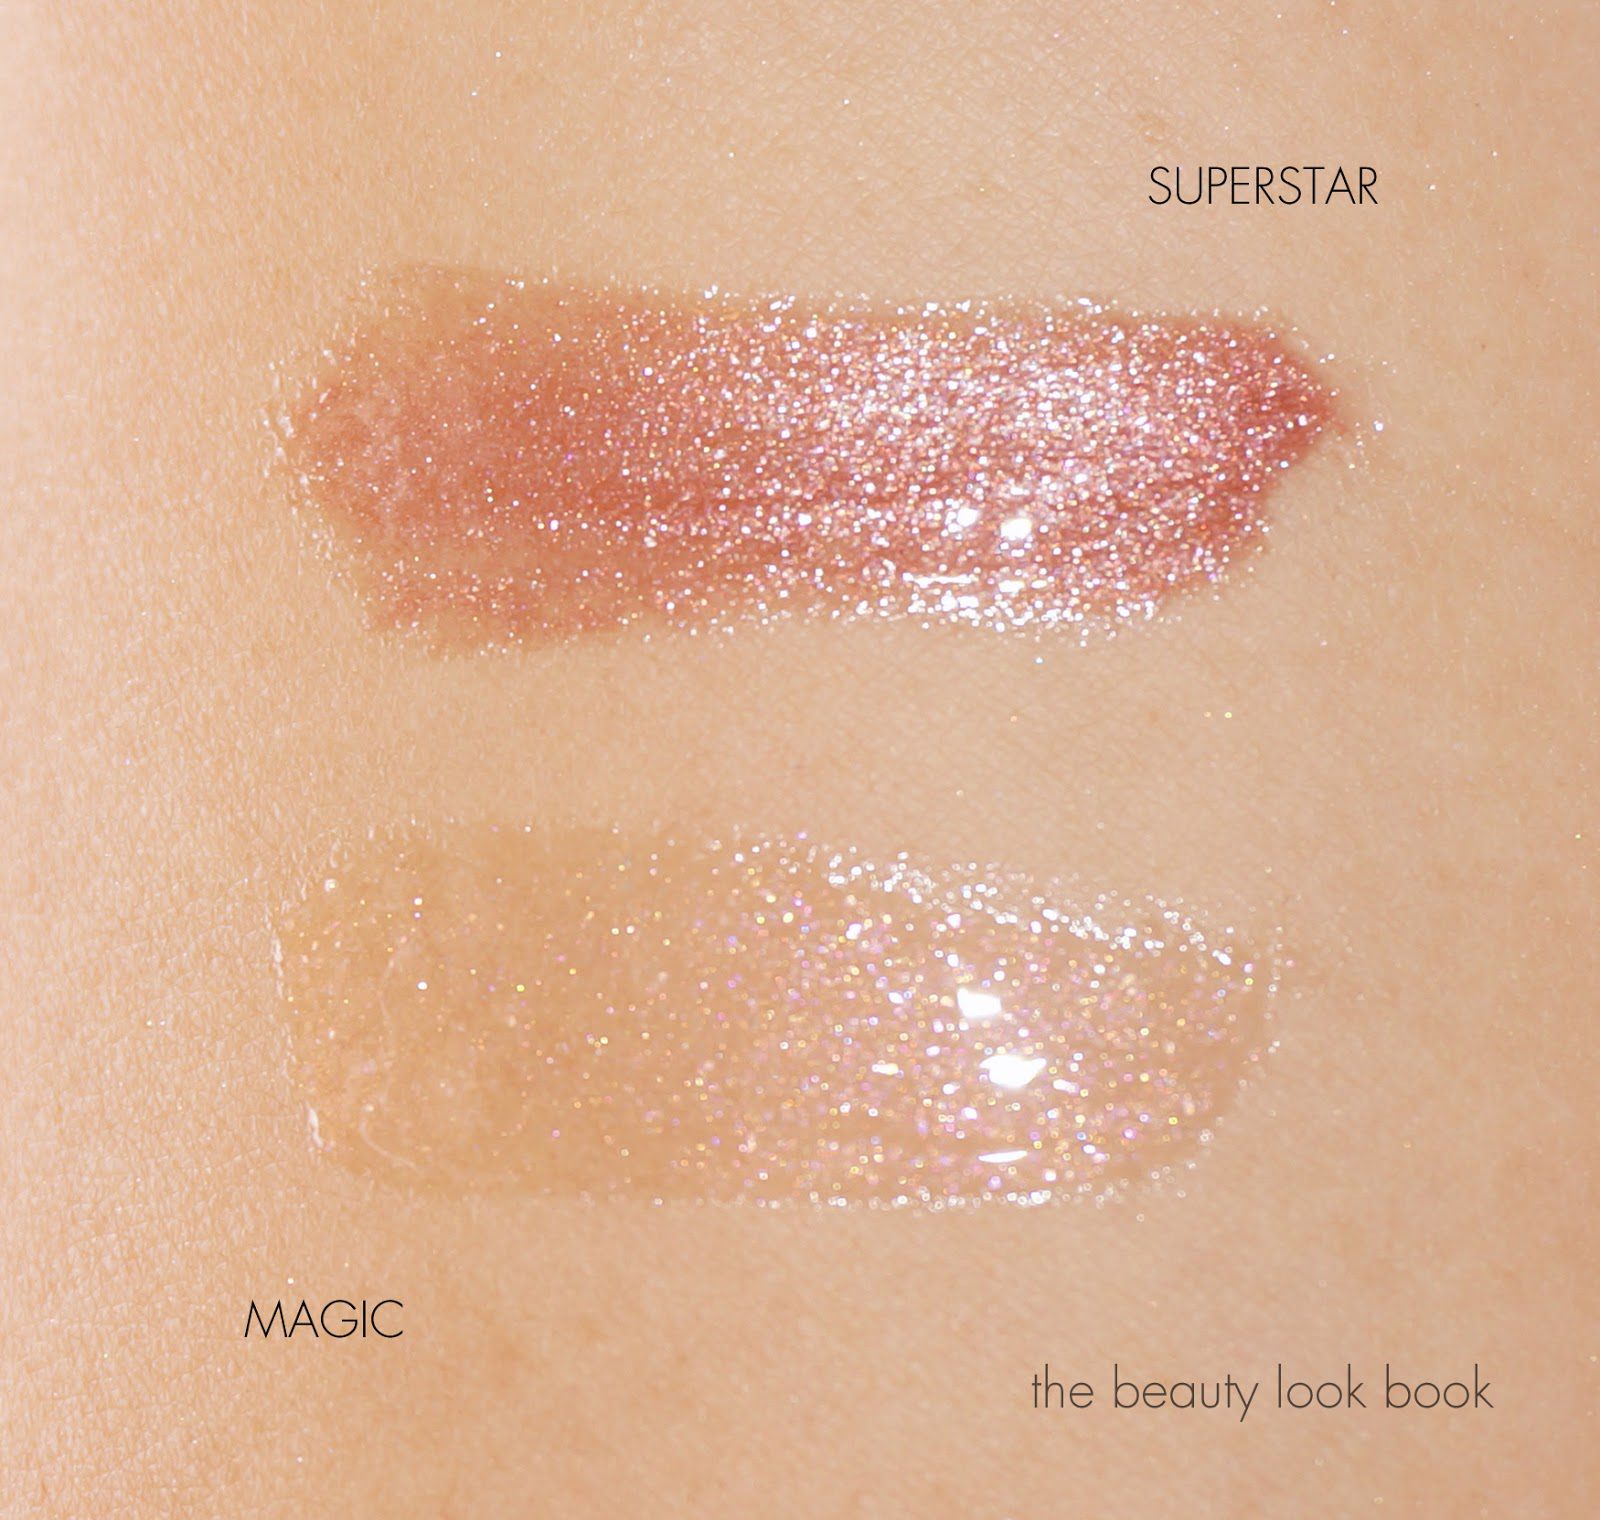 Lipgloss Archives - Page 11 of 31 - The Beauty Look Book